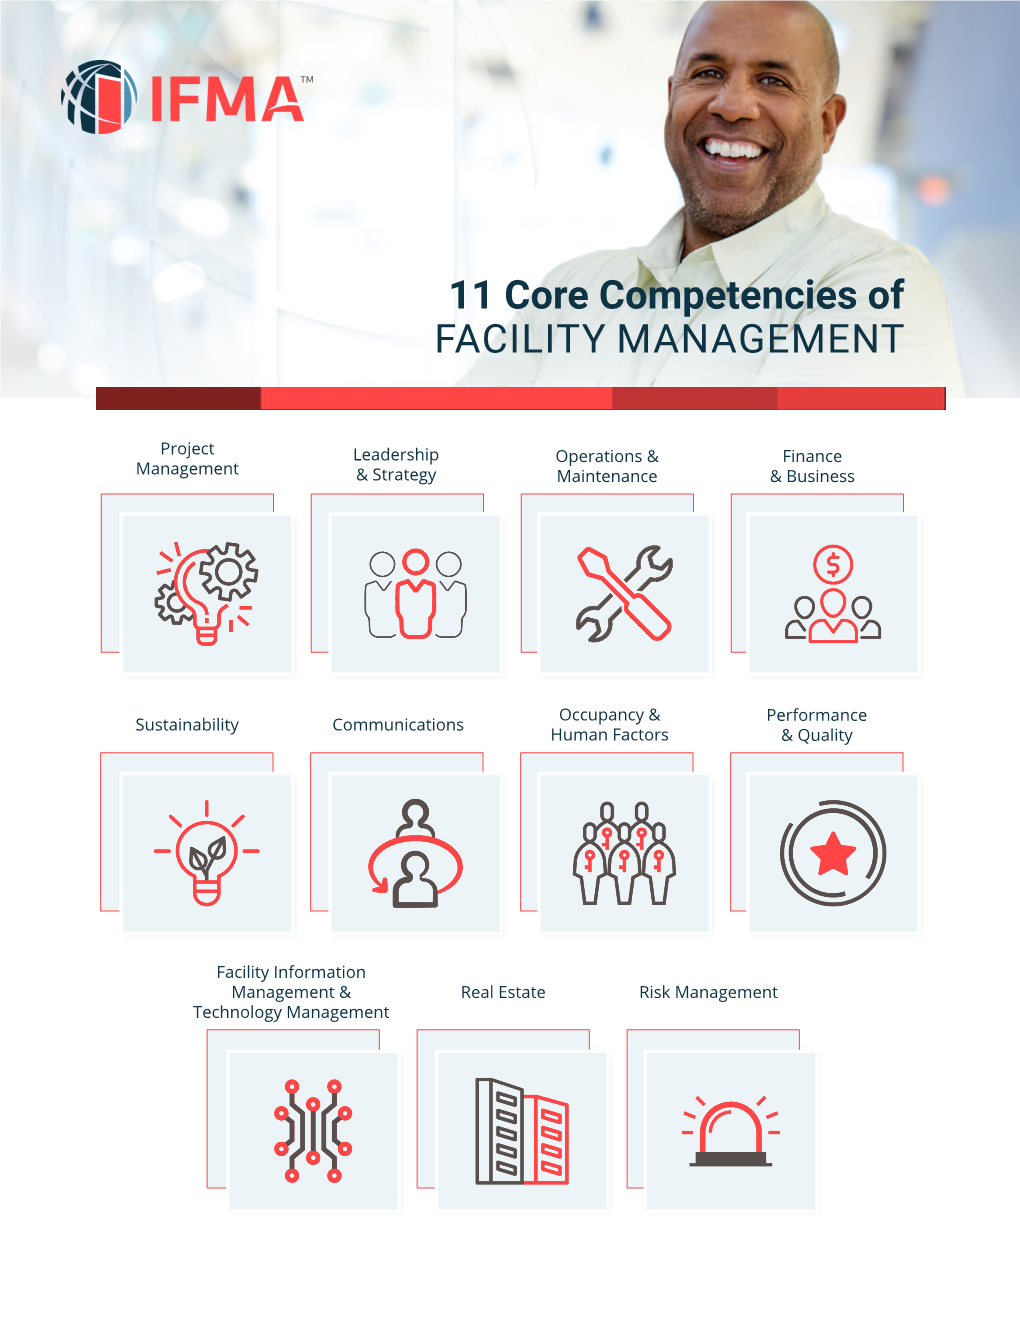 11 Core Competencies of FACILITY MANAGEMENT